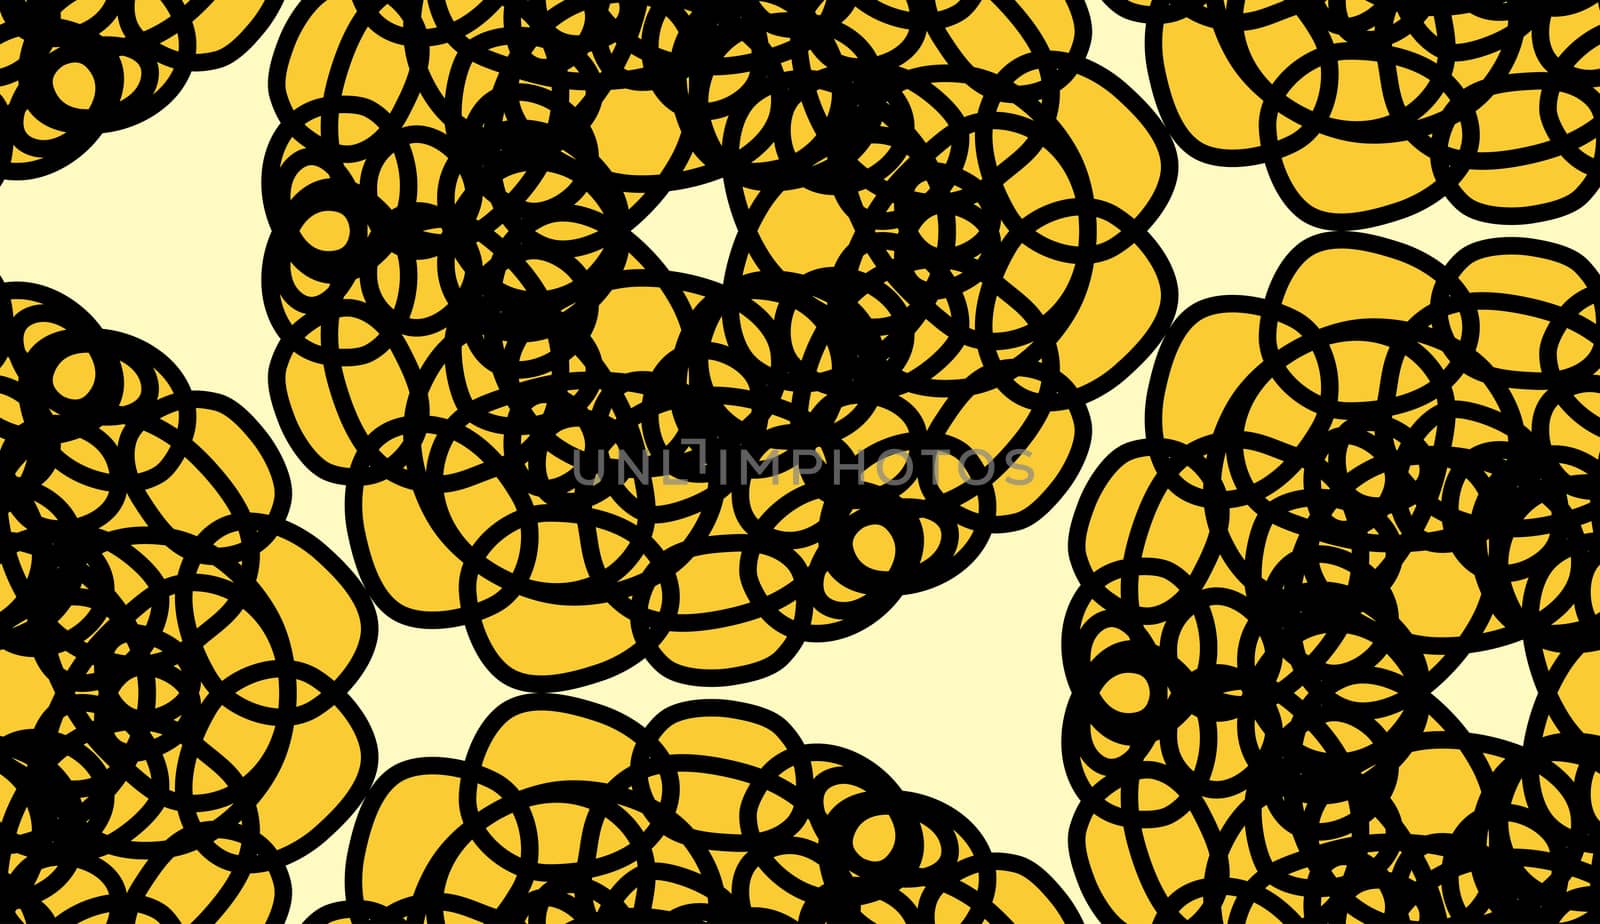 Round scribbled circle shapes in form of yellow flowers as seamless background pattern